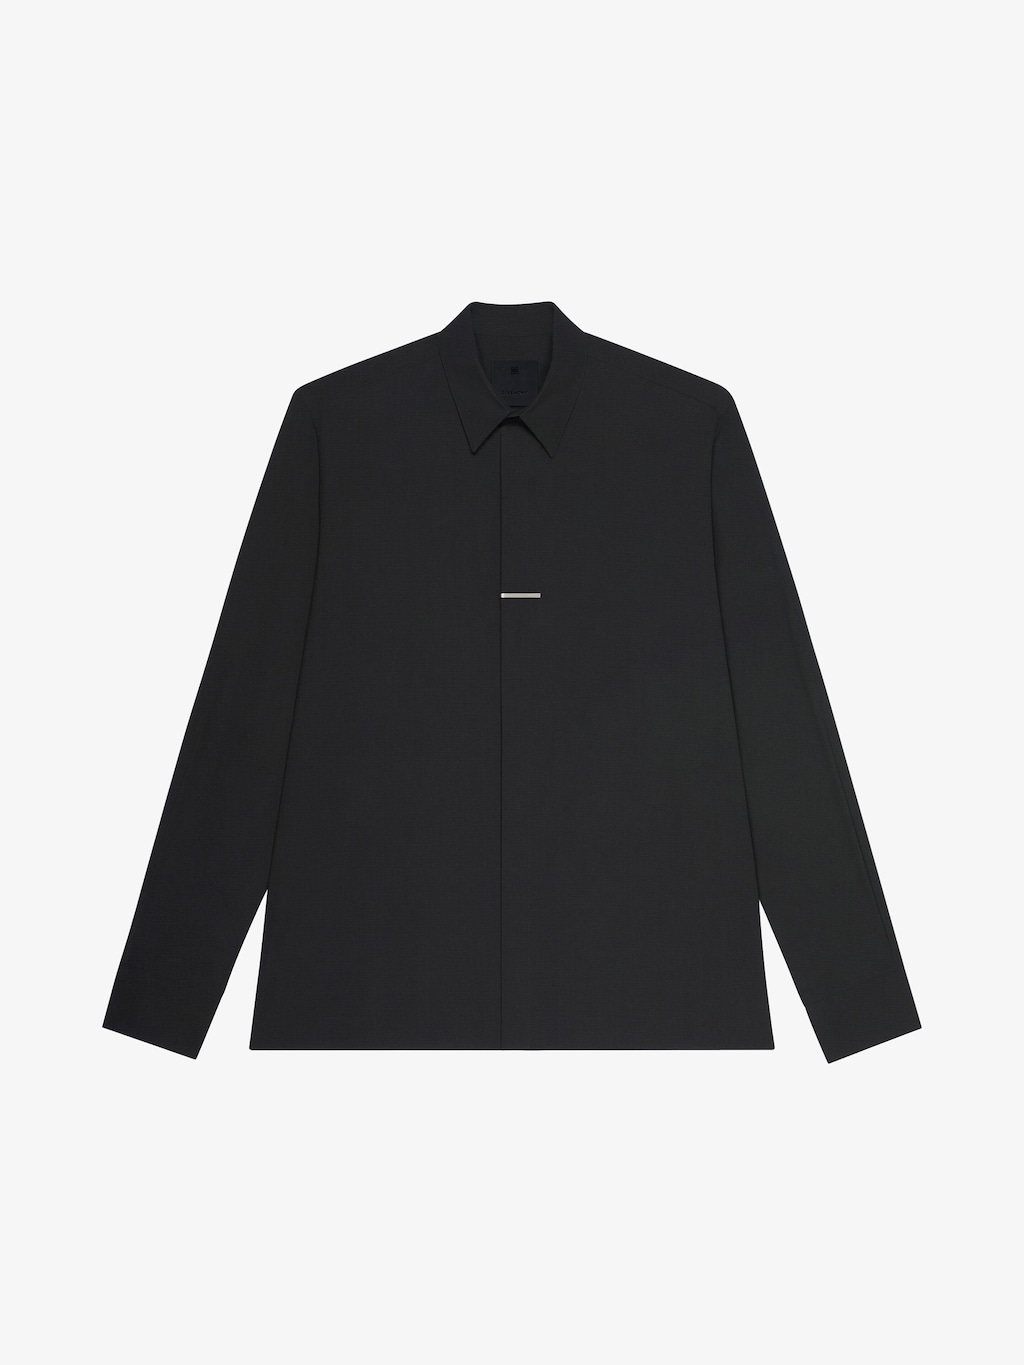 Luxury Shirts Collection for Men | Givenchy US